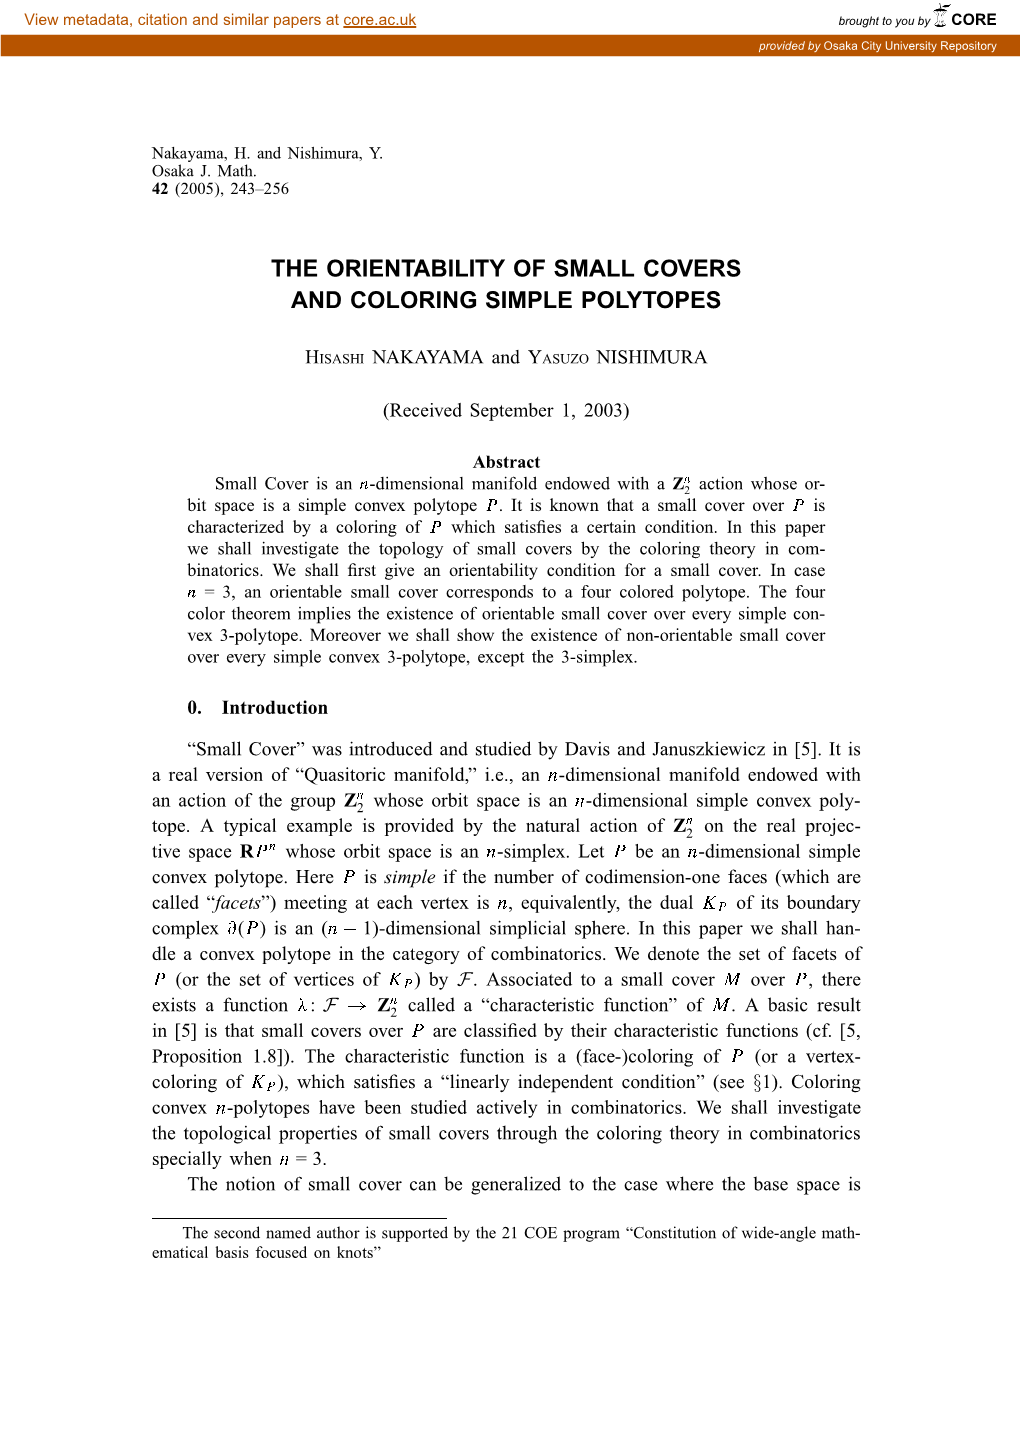 The Orientability of Small Covers and Coloring Simple Polytopes